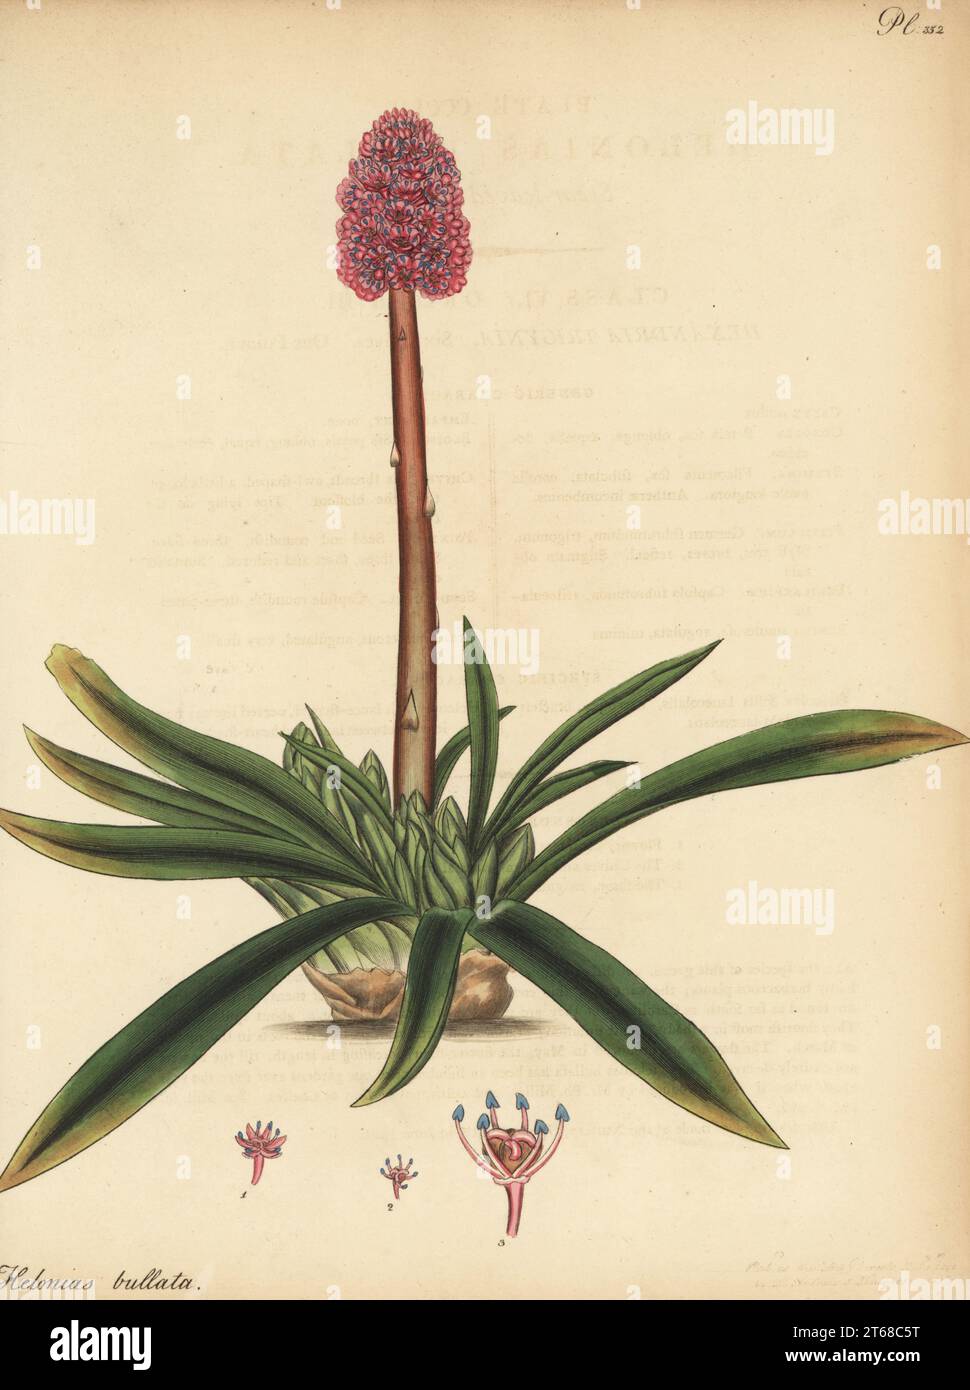 Swamp pink, or spear-leaved helonias, Helonias bullata. North America. In the Hammersmith nursery of Lee and Kennedy. Copperplate engraving drawn, engraved and hand-coloured by Henry Andrews from his Botanical Register, Volume 5, self-published in Knightsbridge, London, 1804. Stock Photo